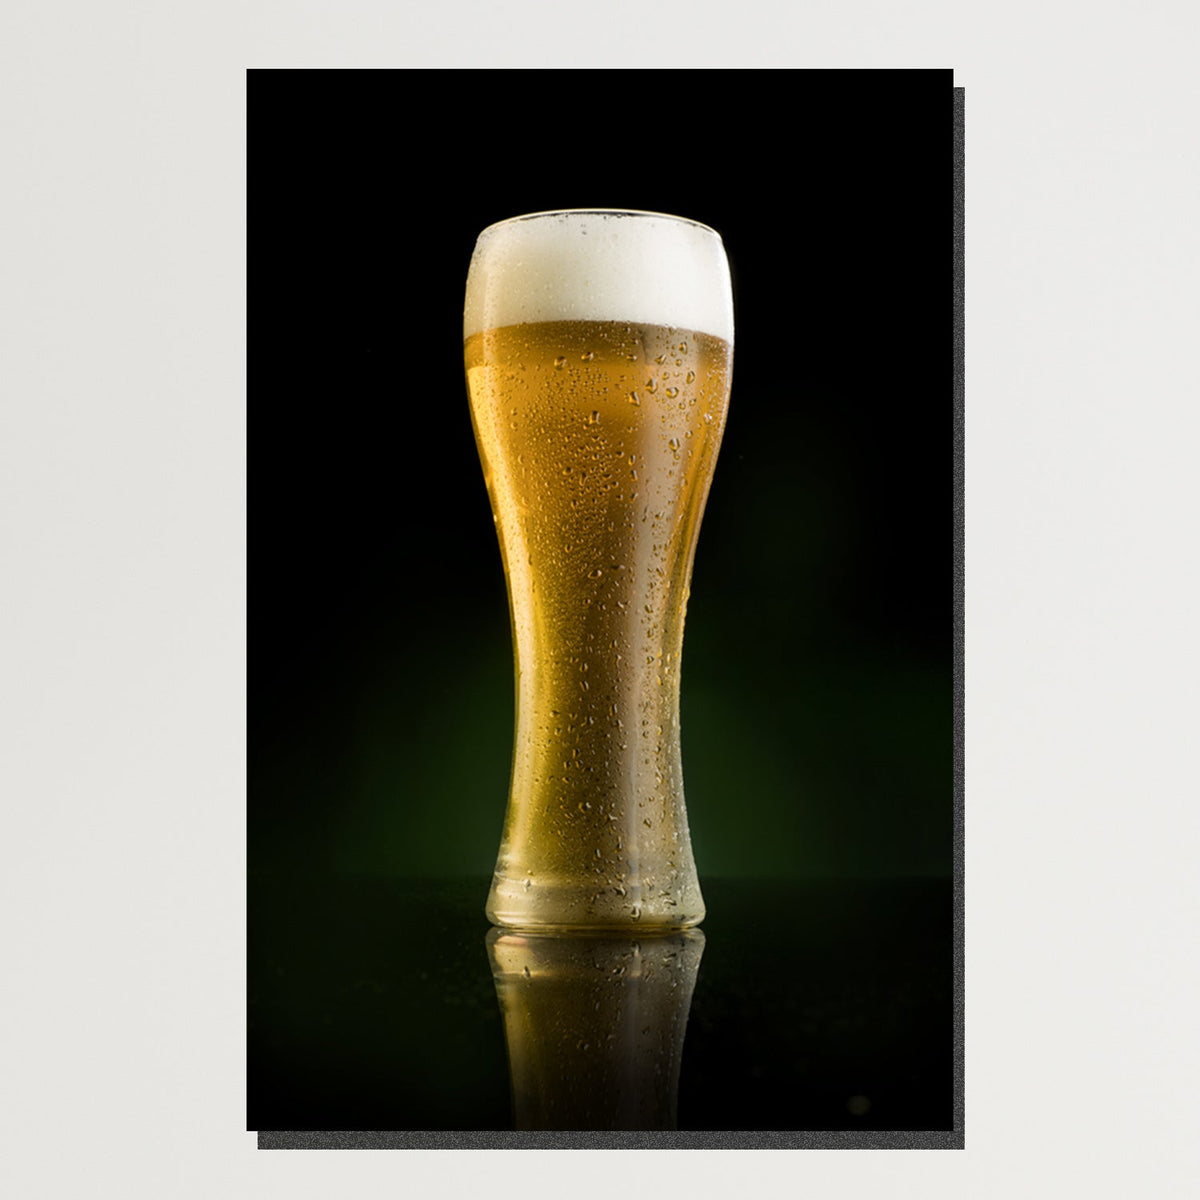 https://cdn.shopify.com/s/files/1/0387/9986/8044/products/FrostedGlassofBeerCanvasArtprintStretched-Plain.jpg